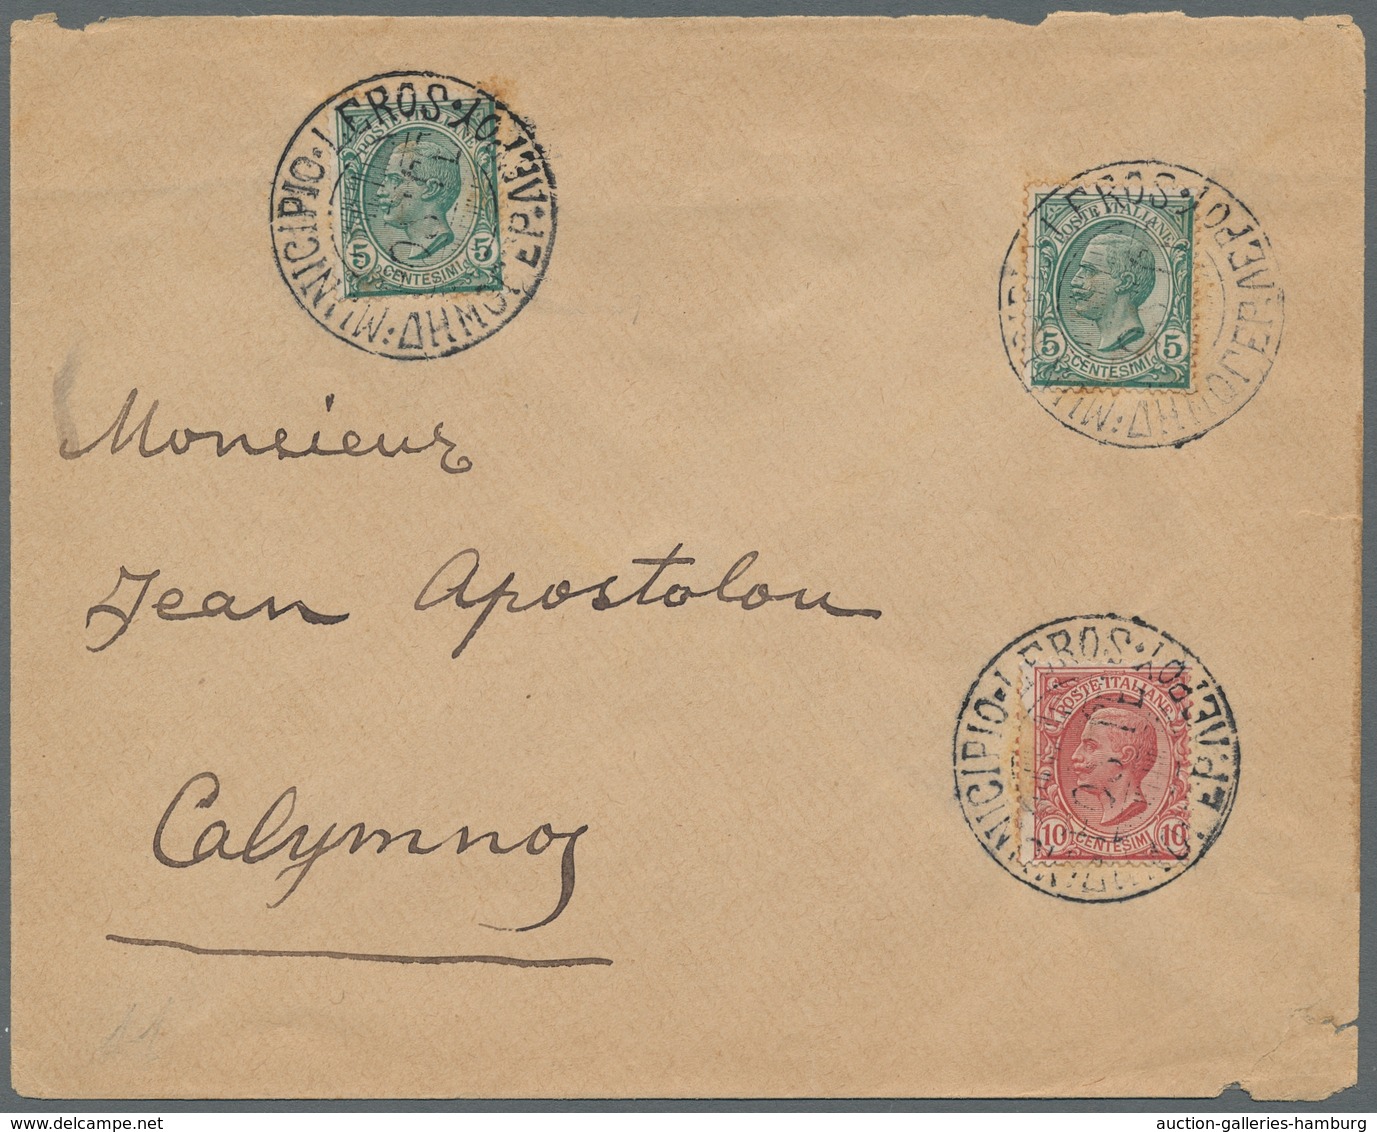 Ägäische Inseln: 1912, Italy Michel 88 (2) And 89 As Mixed Franking On Cover With Bilingual MUNCIPIO - Egeo